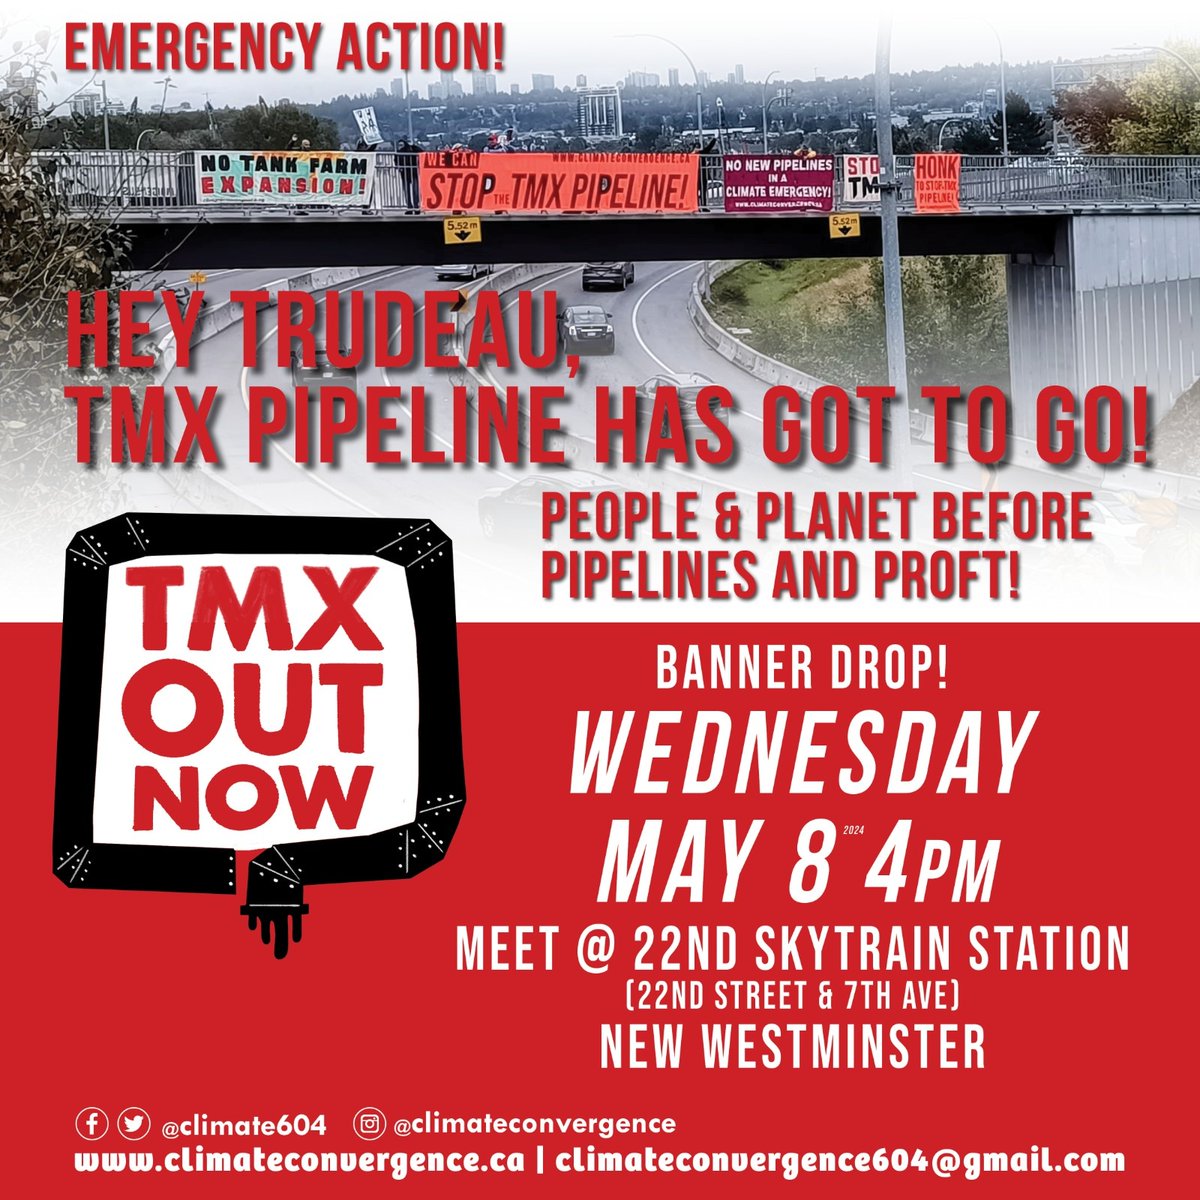 EMERGENCY ACTION #StopTMX! Join Banner Drop May 8 @ 22nd St SkyTrain Station #NewWest Trudeau has given climate destroying TMX the  rubber-stamp to operate - unite to demand: Cancel TMX Now! 
#vanpoli #bcpoli #cdnpoli #systemchangnotclimatechange #climateaction #ClimateJustice